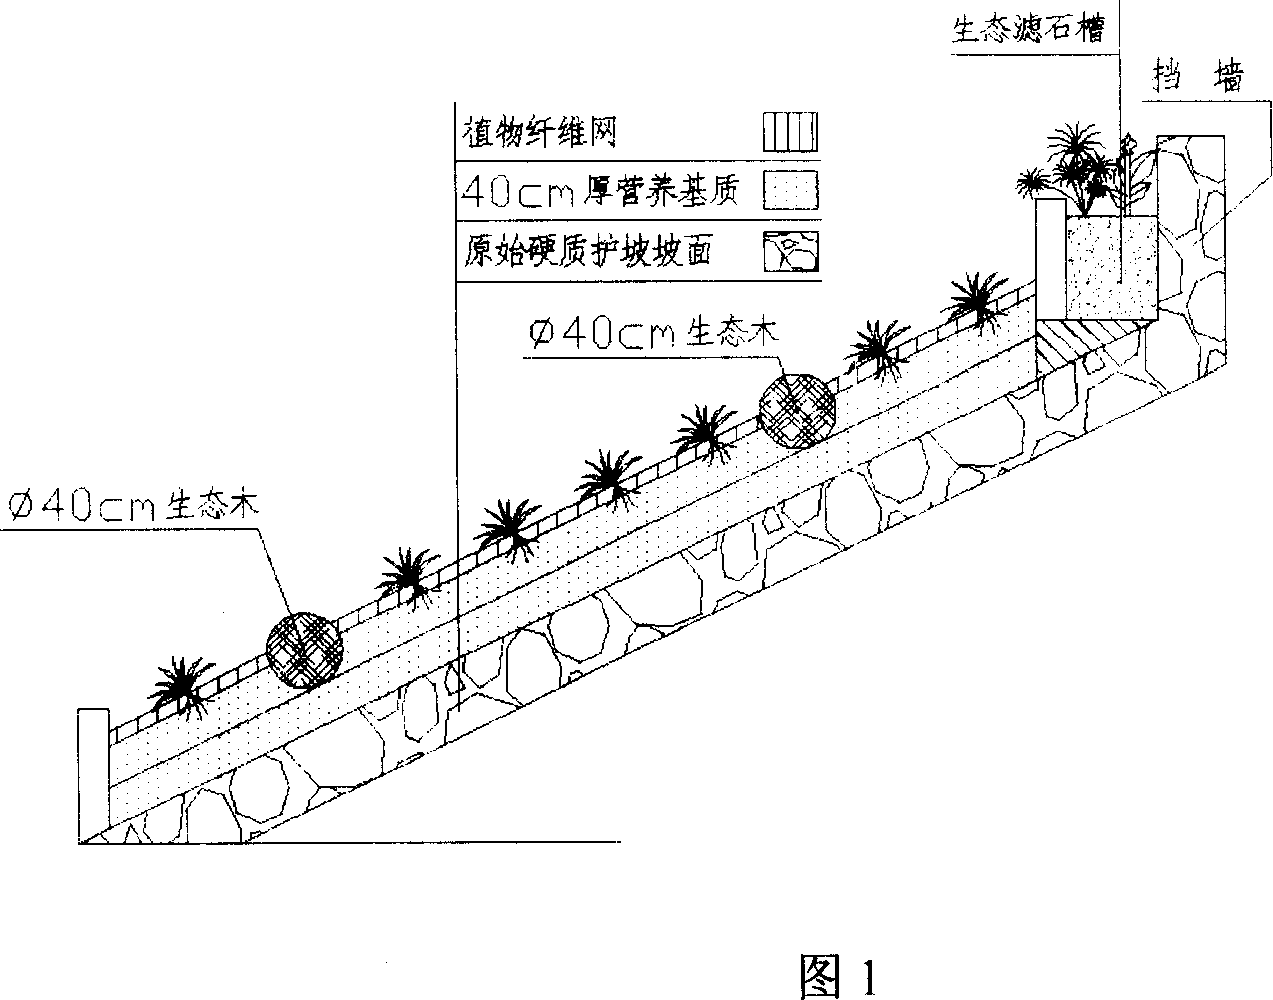 Method for slope protecting natural simulating ecological constitution and taking account of surface source pollution control